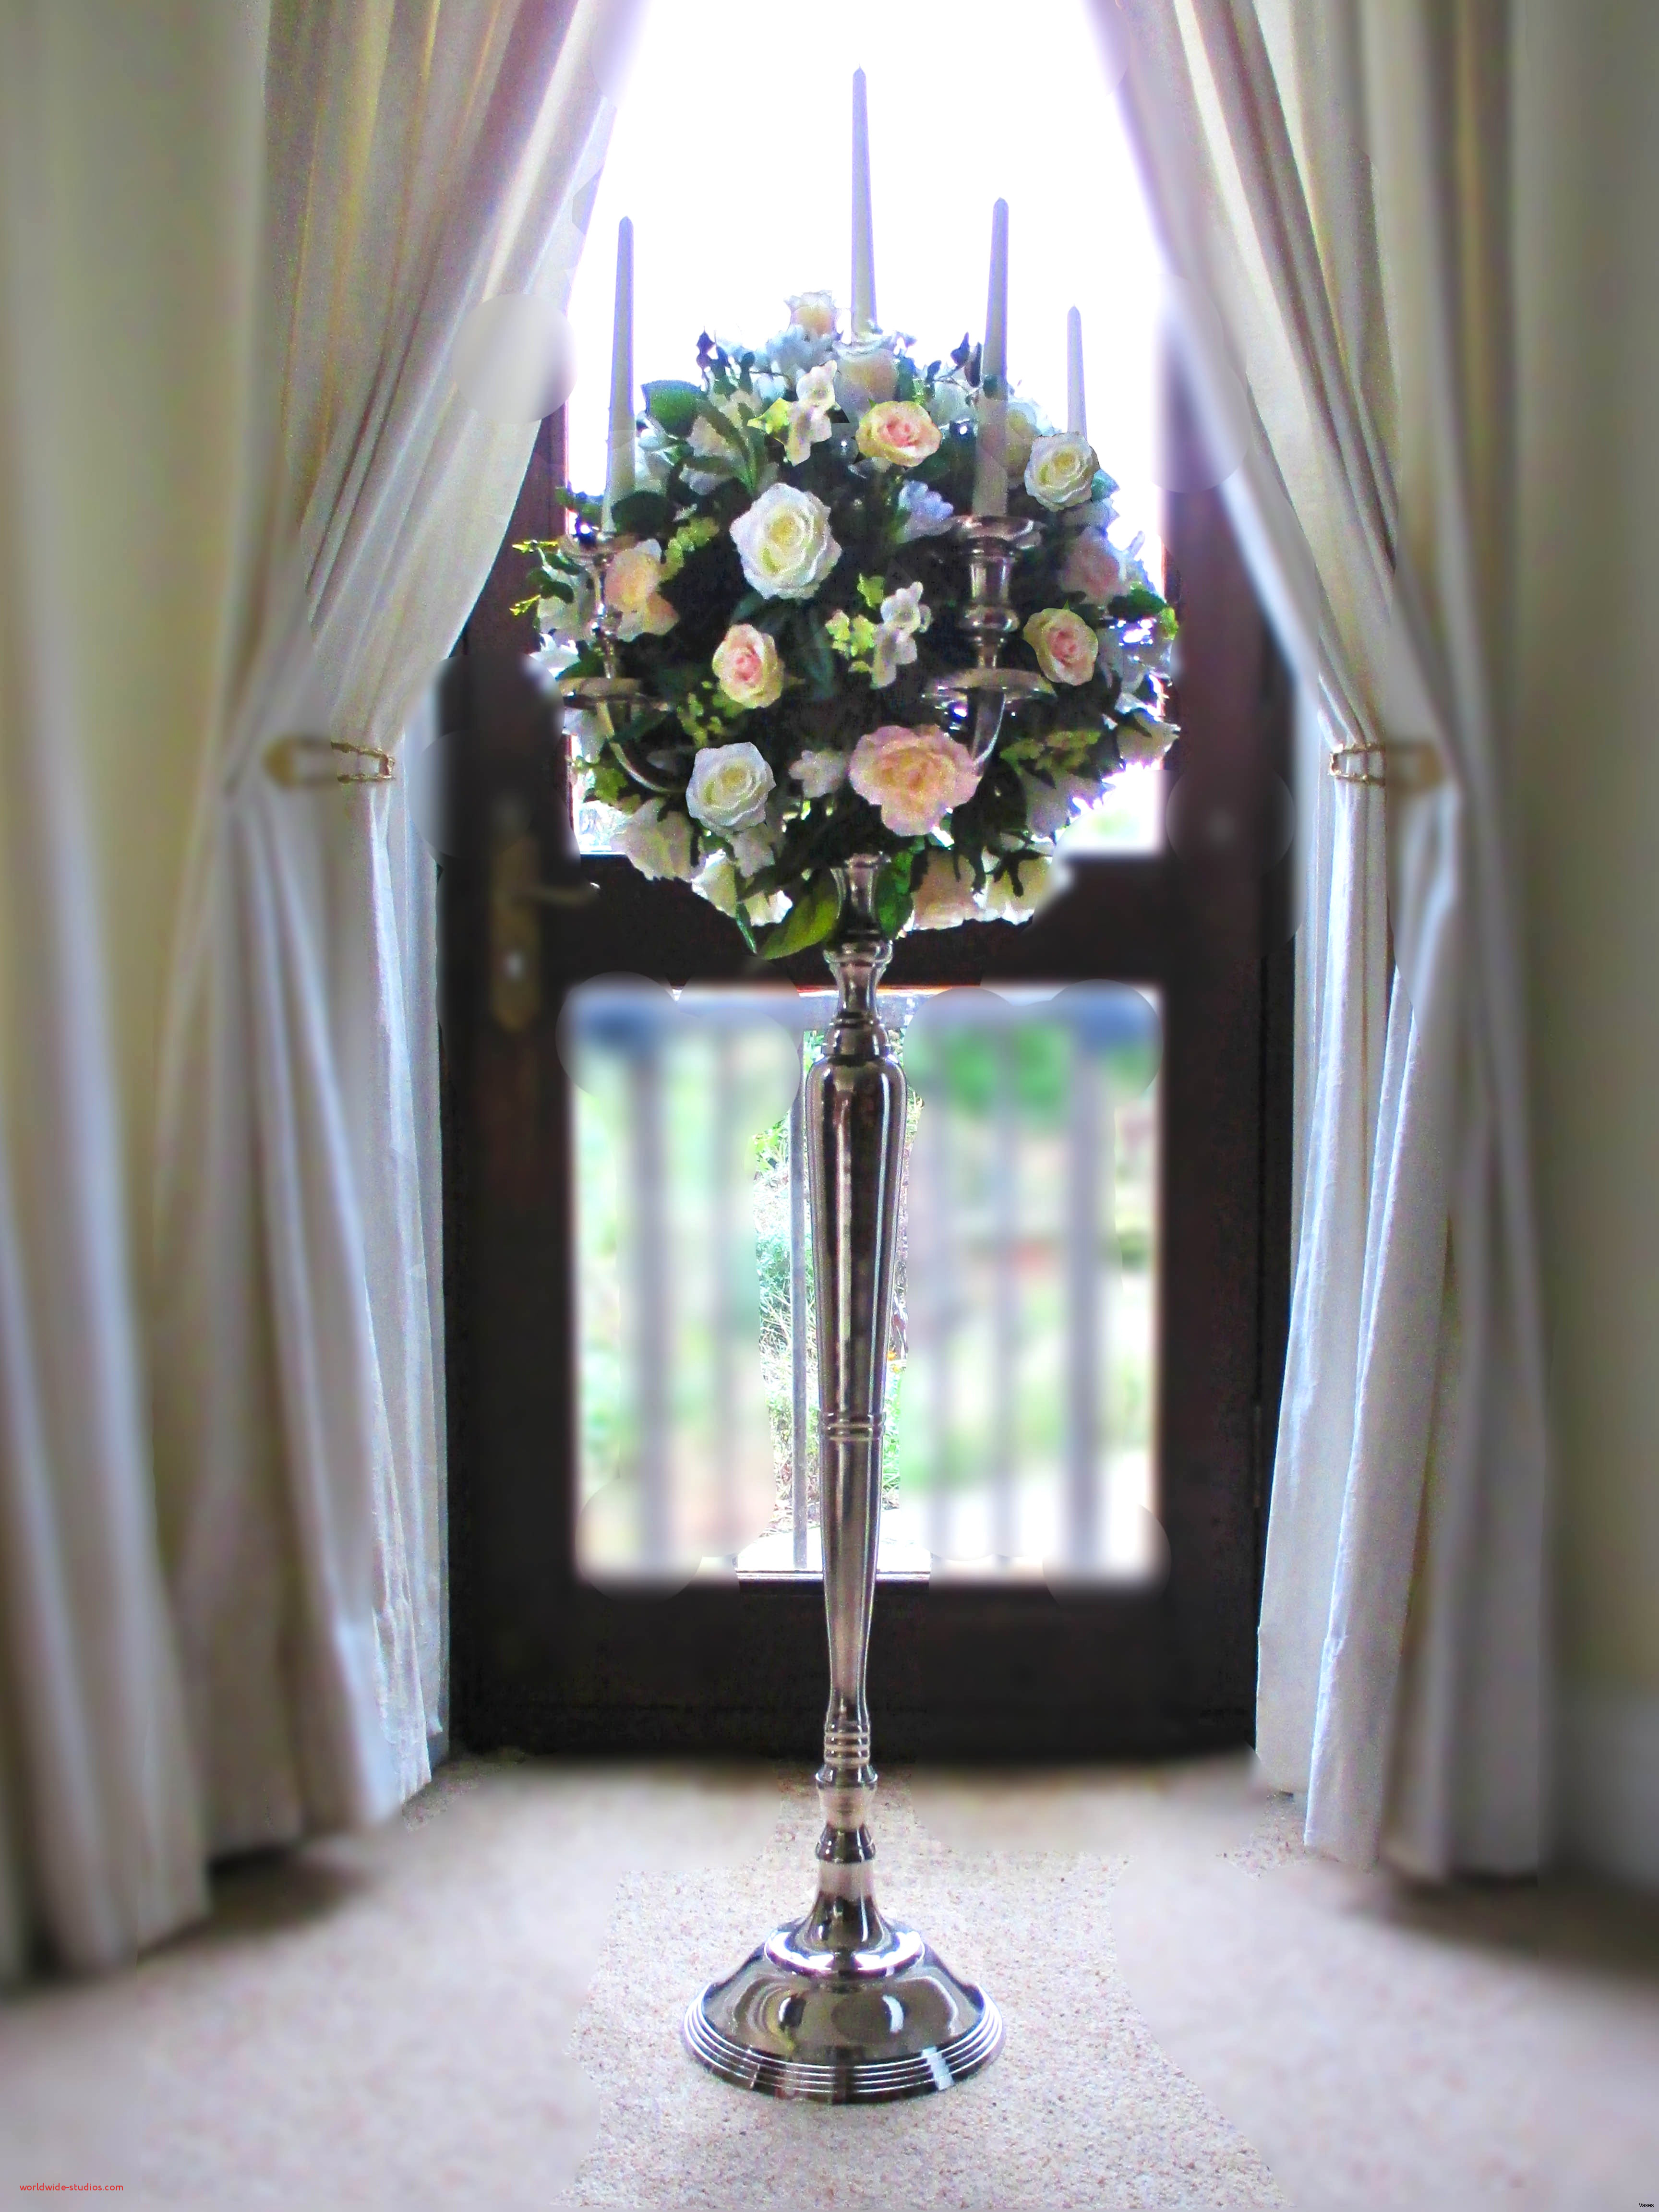 13 Wonderful Gold Trumpet Vase 2022 free download gold trumpet vase of silver vases for weddings www topsimages com pertaining to top result diy wedding ideas for a tight budget luxury cheap wedding bouquets packages vases jpg